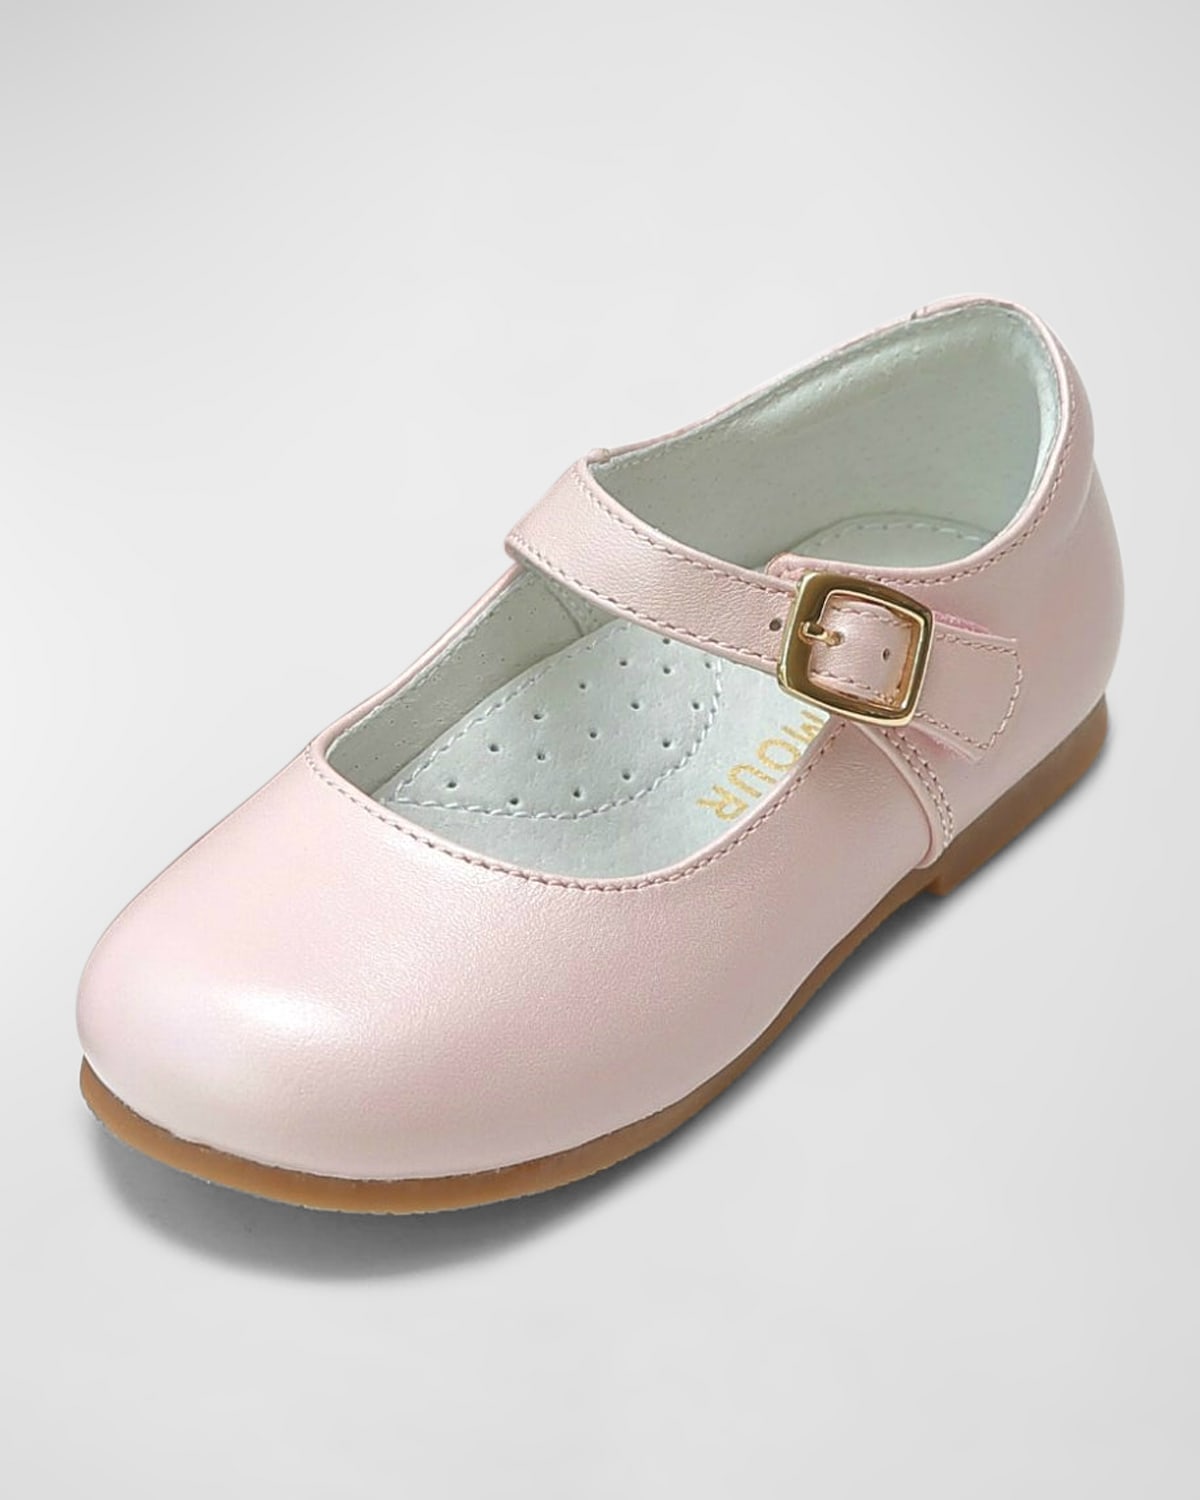 L'amour Shoes Girl's Rebecca Mary Jane Flats, Baby/toddlers/kids In Pink